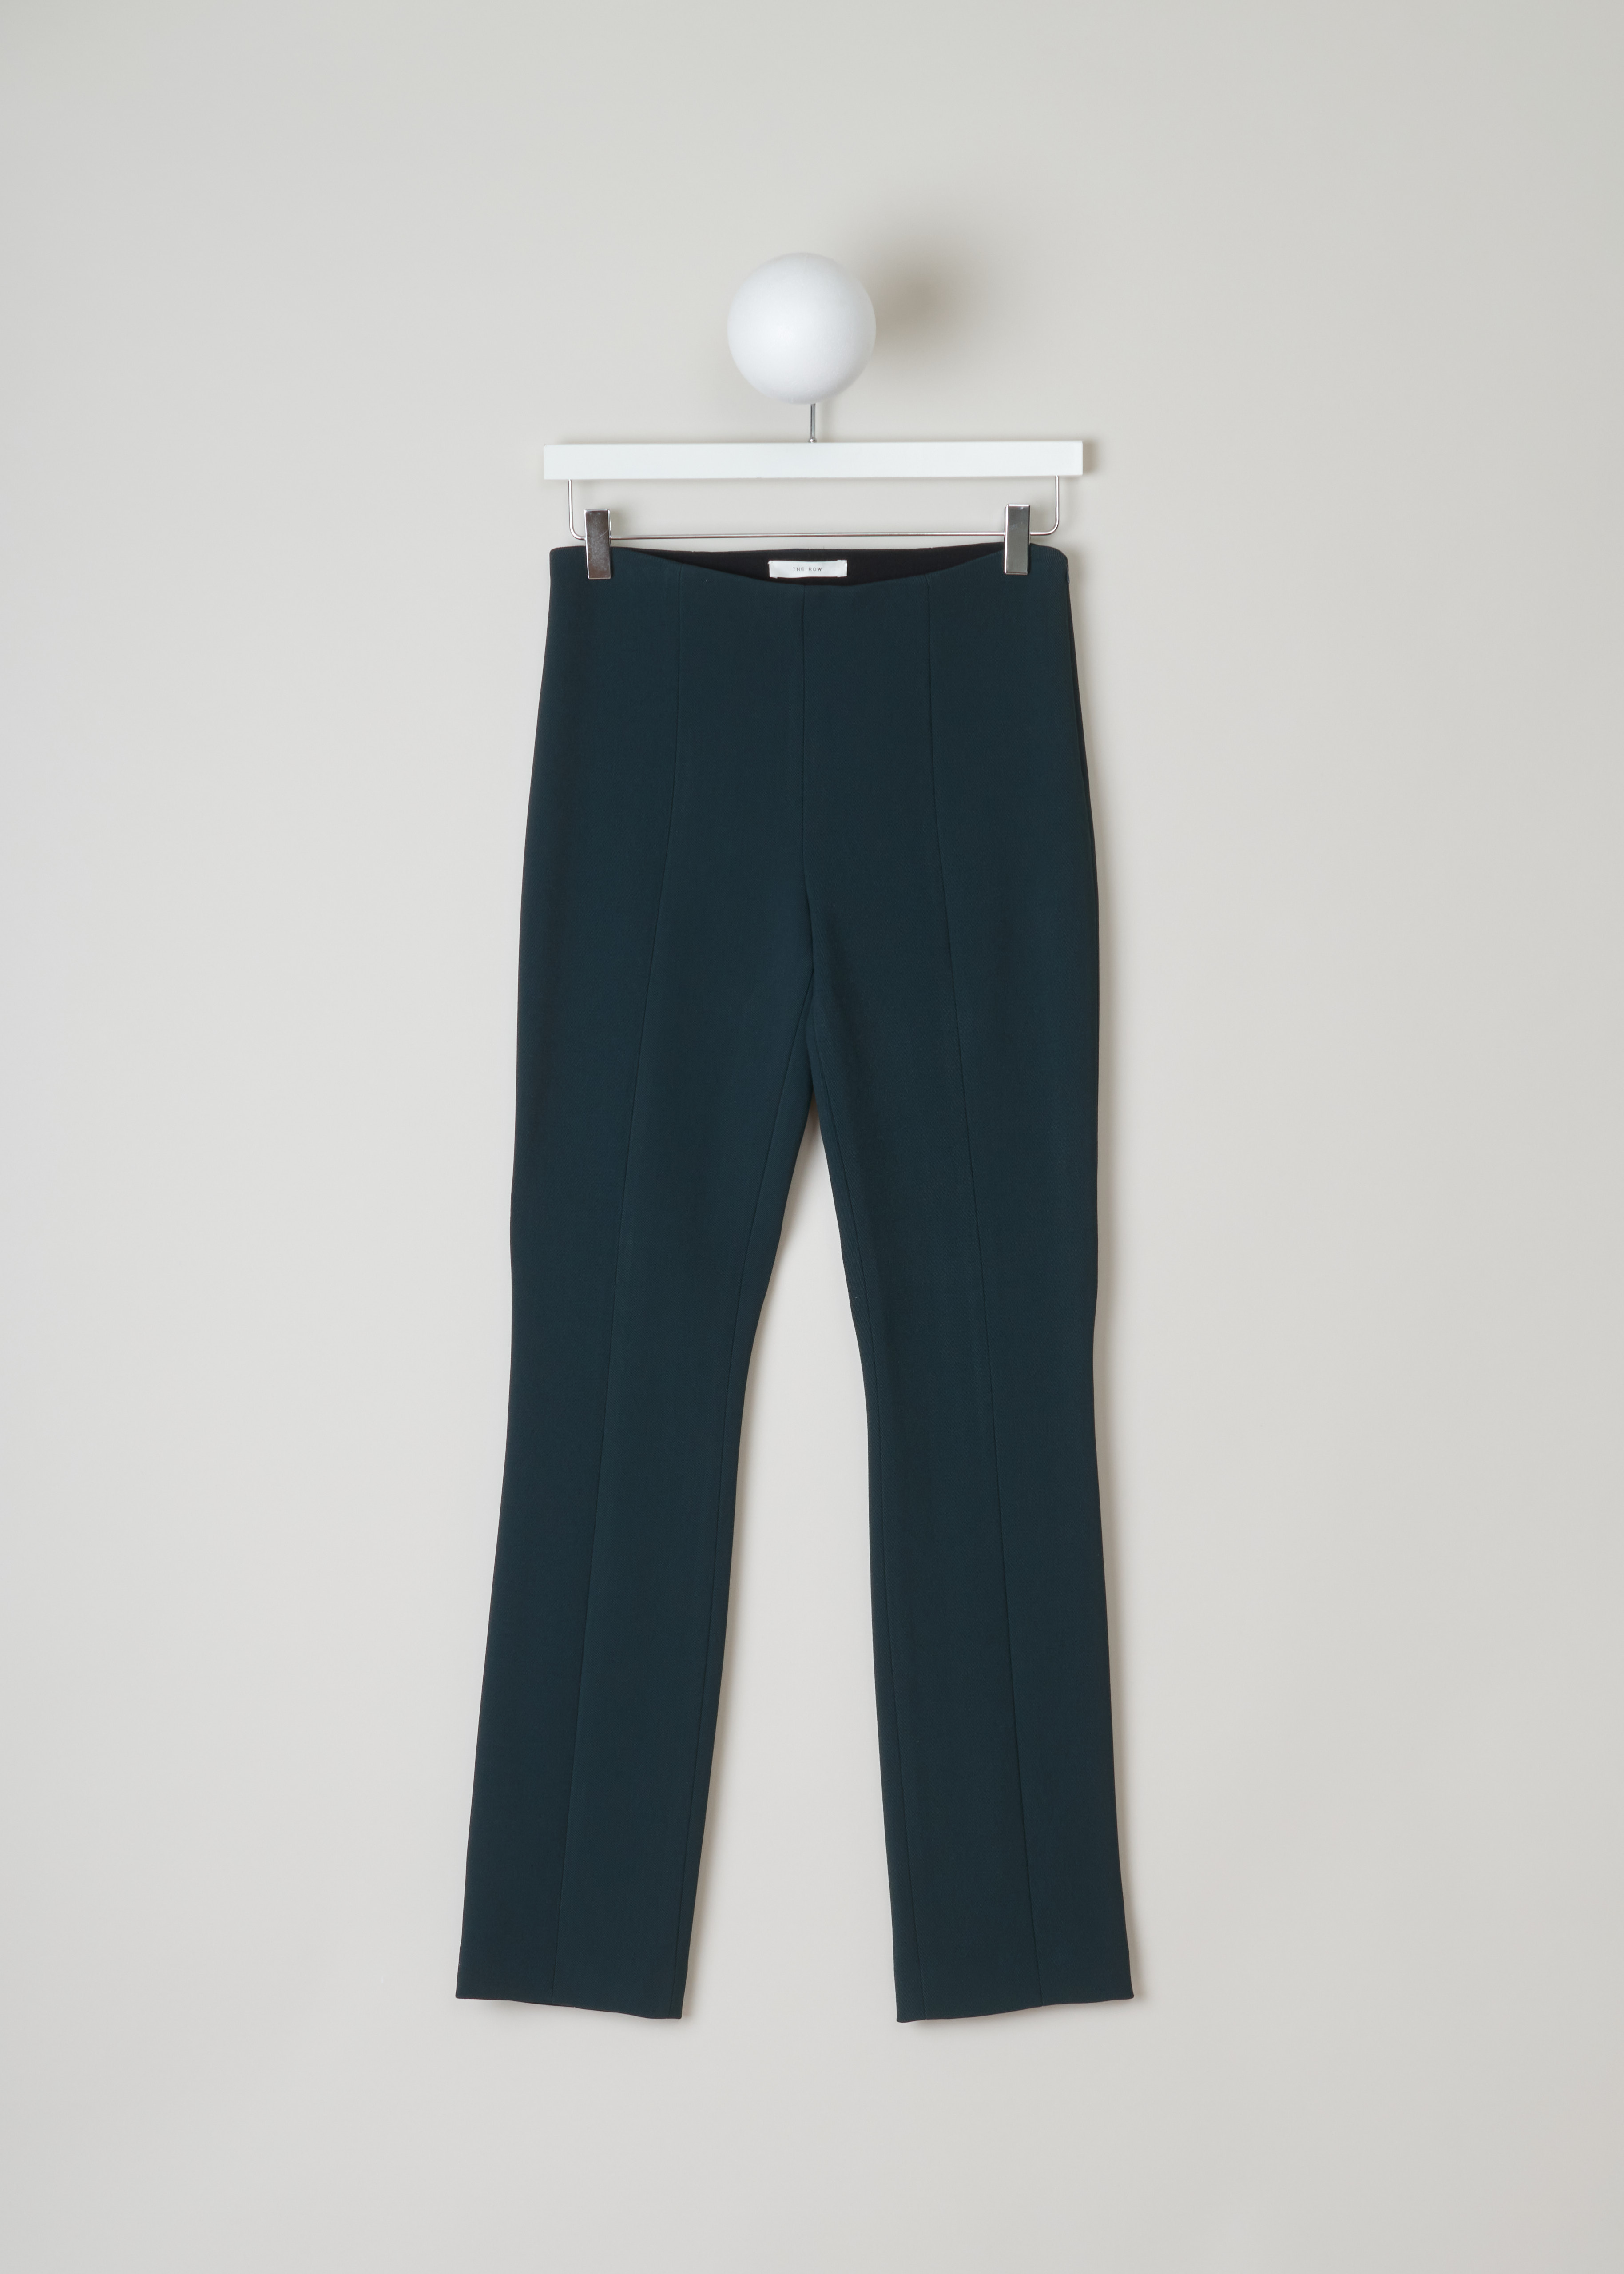 The Row Rona pant in dark green RONA_PANT_4435WI_I_38_DRK_PCCK_GRN front. Straight fitted Rona pant with a high waist, an ankle length and an invisible zipper fastening on the side.